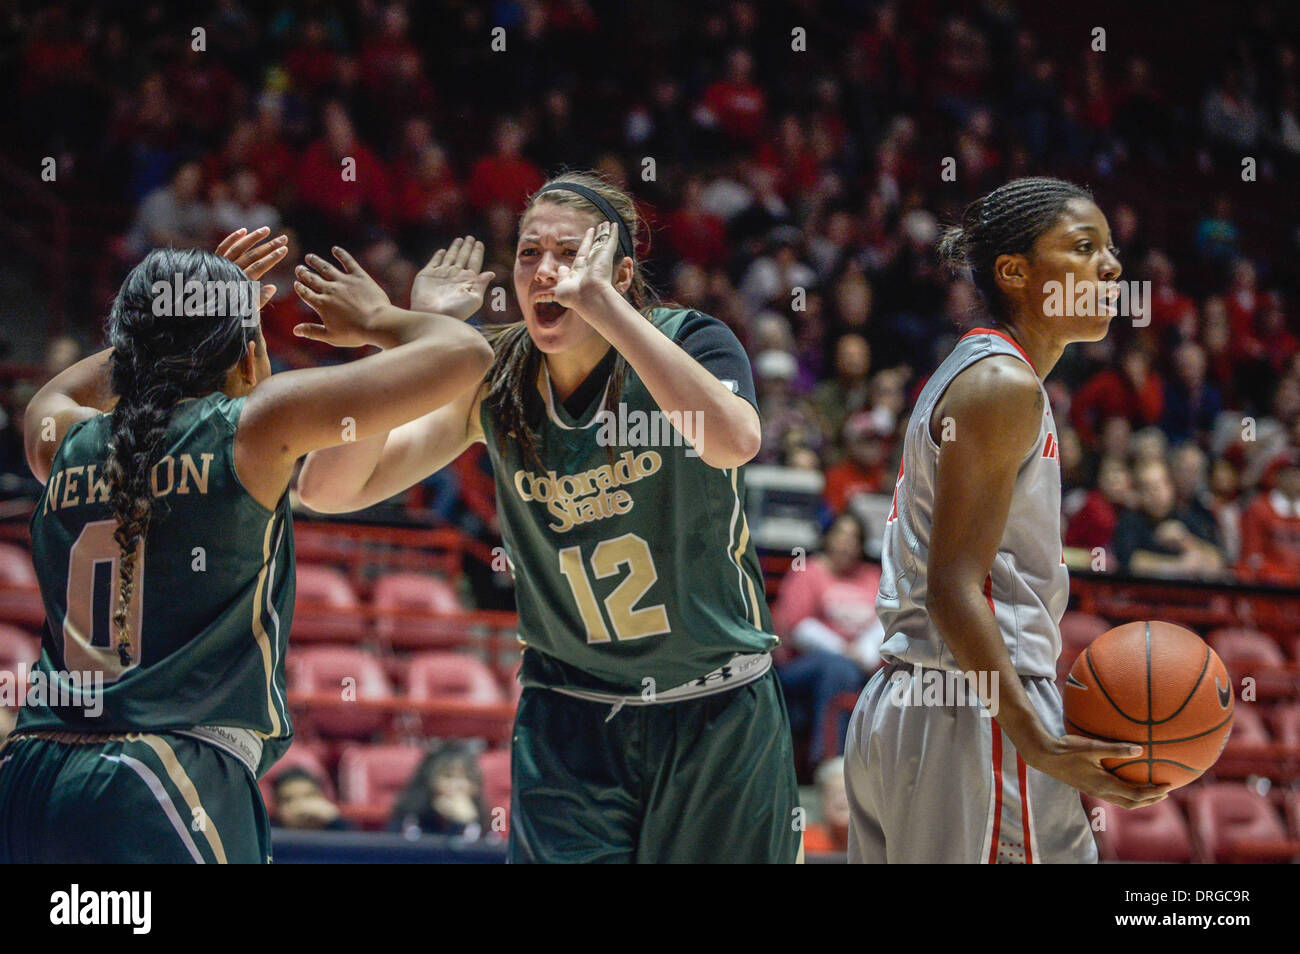 Albuquerque, New Mexico, USA. 25th Jan, 2014. Roberto E. Rosales.Lobo Antiesha Brown(Cq), right, can't believe the call and reacts in disbelief as Colorado State players AJ Newton(Cq), left and Sam Martin(Cq), middle, high five each other. The Lobo women had chance to put the game away late in the second half but couldn't. Shumpert led the Lobos in scoring with 14 points. Roberto E. Rosales/Albuquerque Journal.Albuquerque, New Mexico. © Roberto E. Rosales/Albuquerque Journal/ZUMAPRESS.com/Alamy Live News Stock Photo